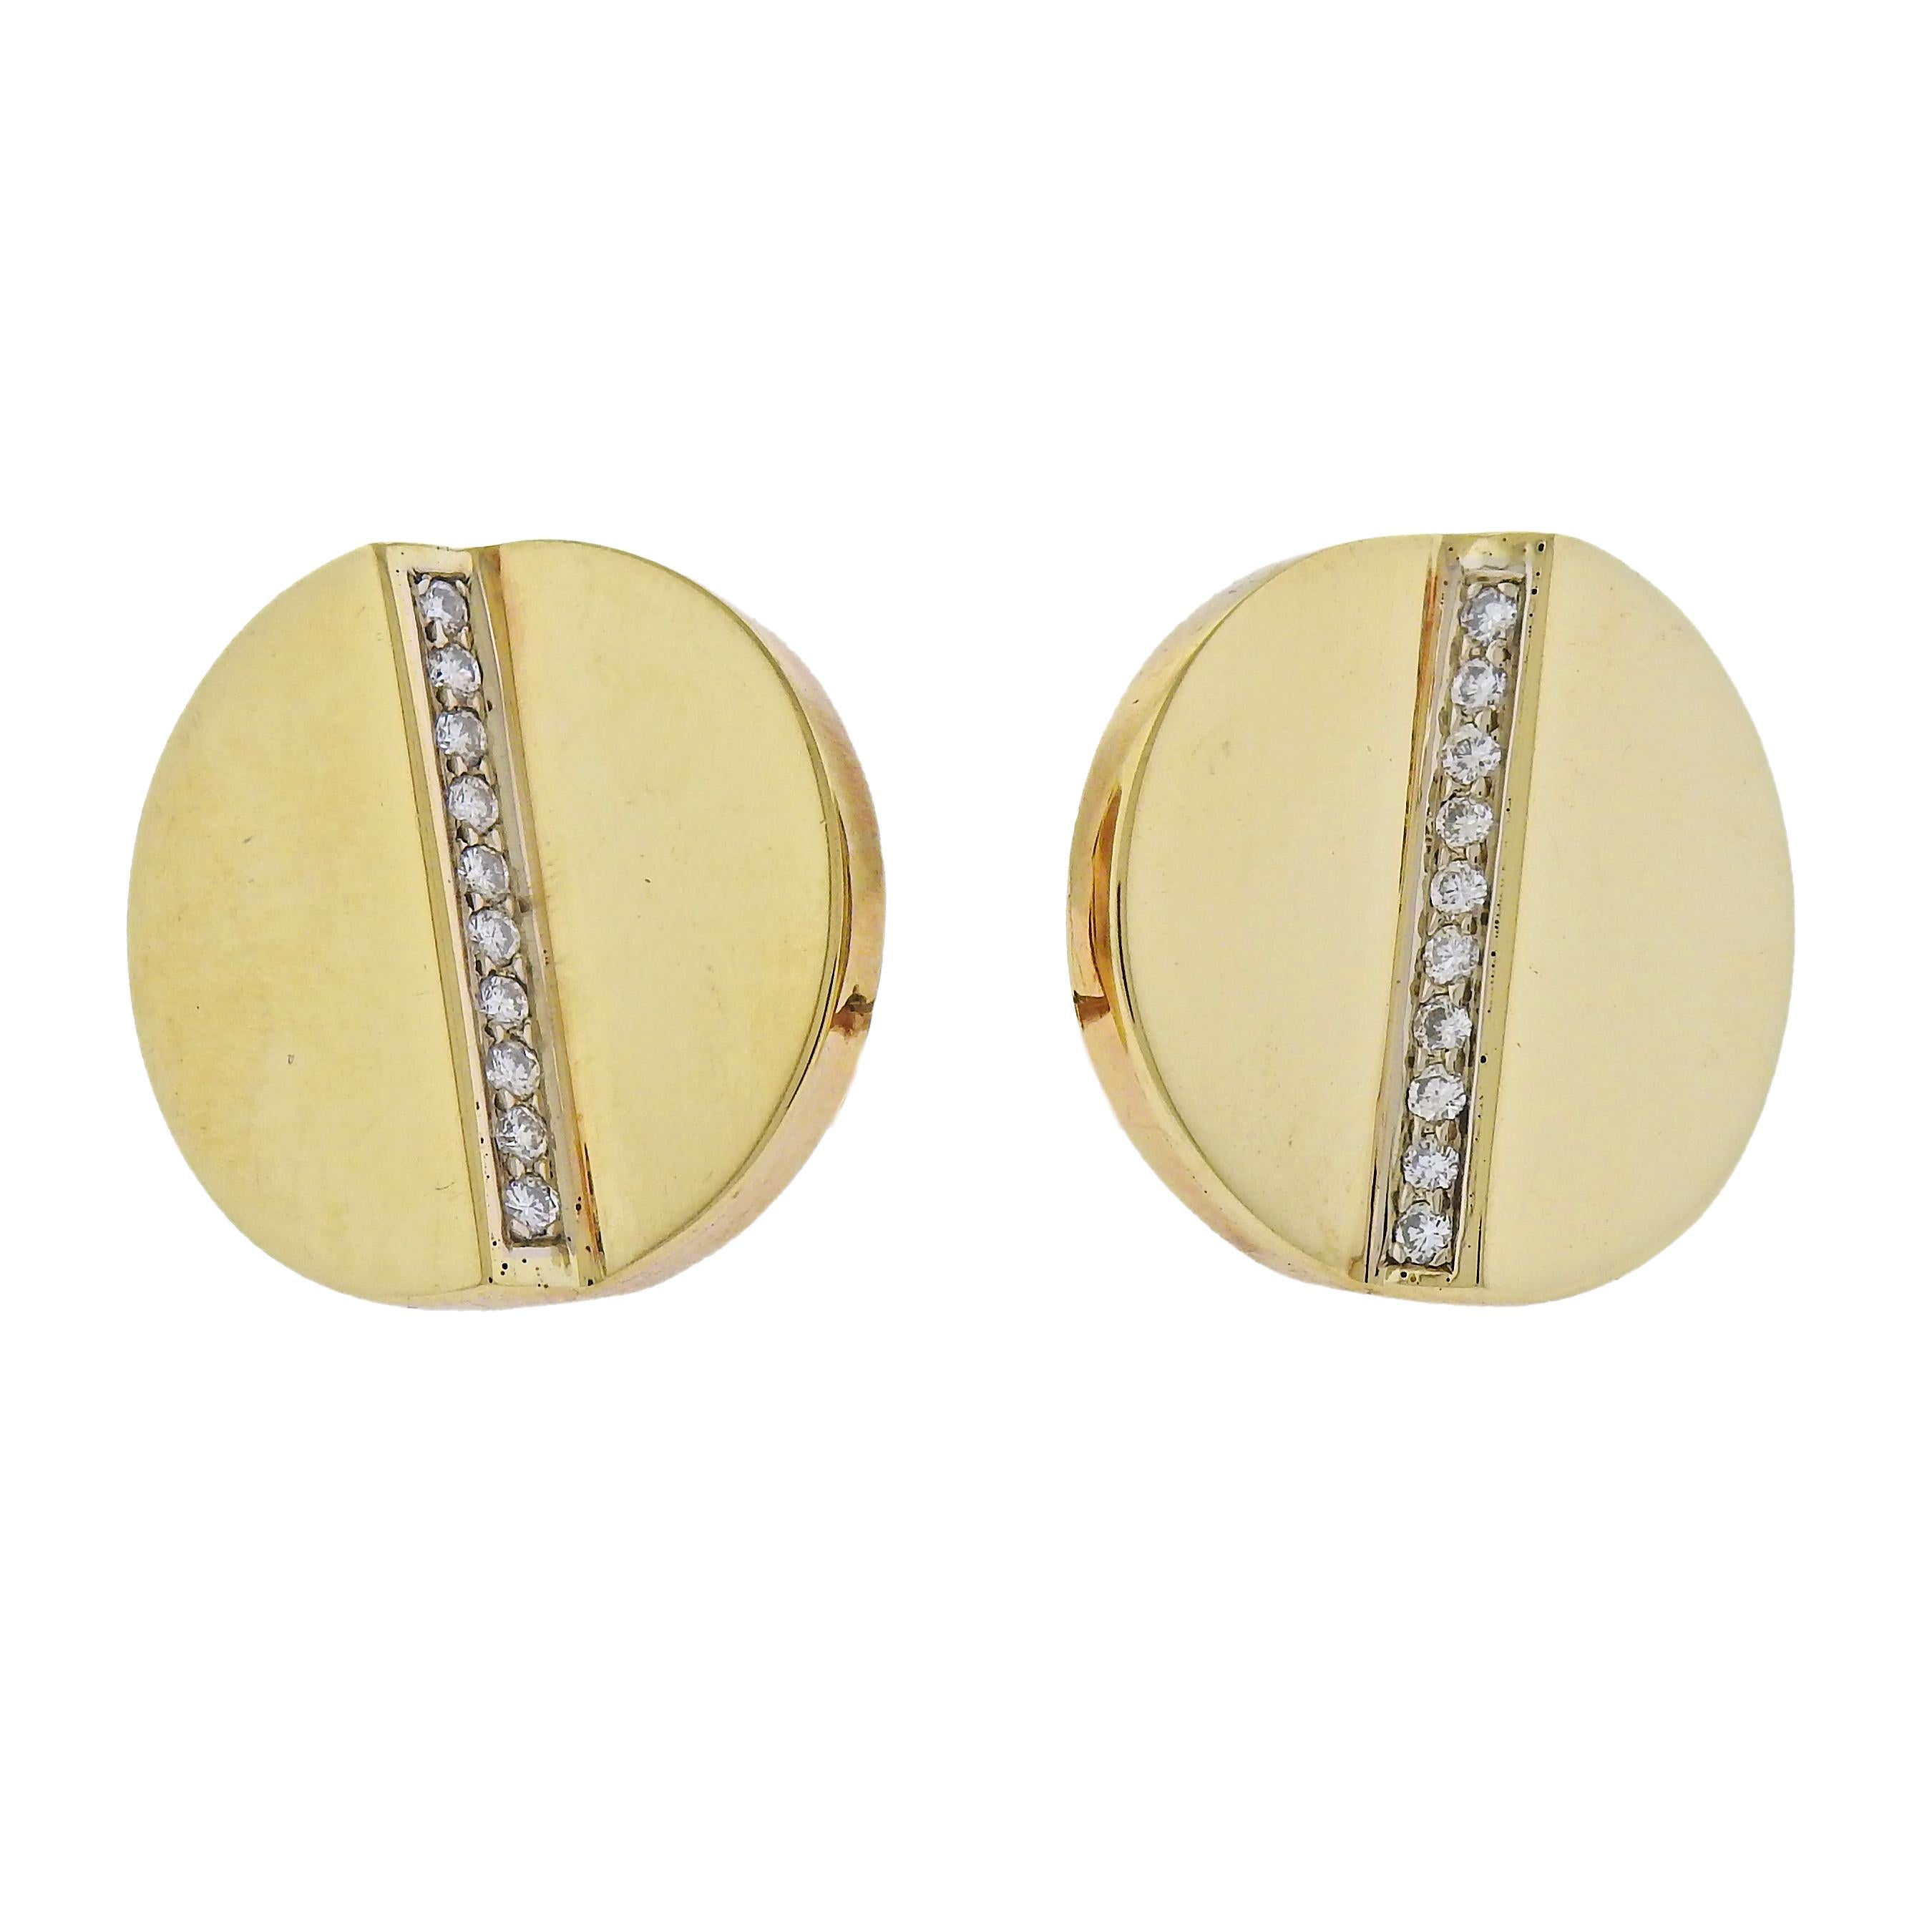 Pair of vintage 1970s 18k gold earrings by Aldo Cipullo, with approx. 0.40ctw in G/VS diamonds. Earrings are 22mm in diameter. Marked - Aldo Cipullo, 1974, 18k. Weight 12.7 grams. 

